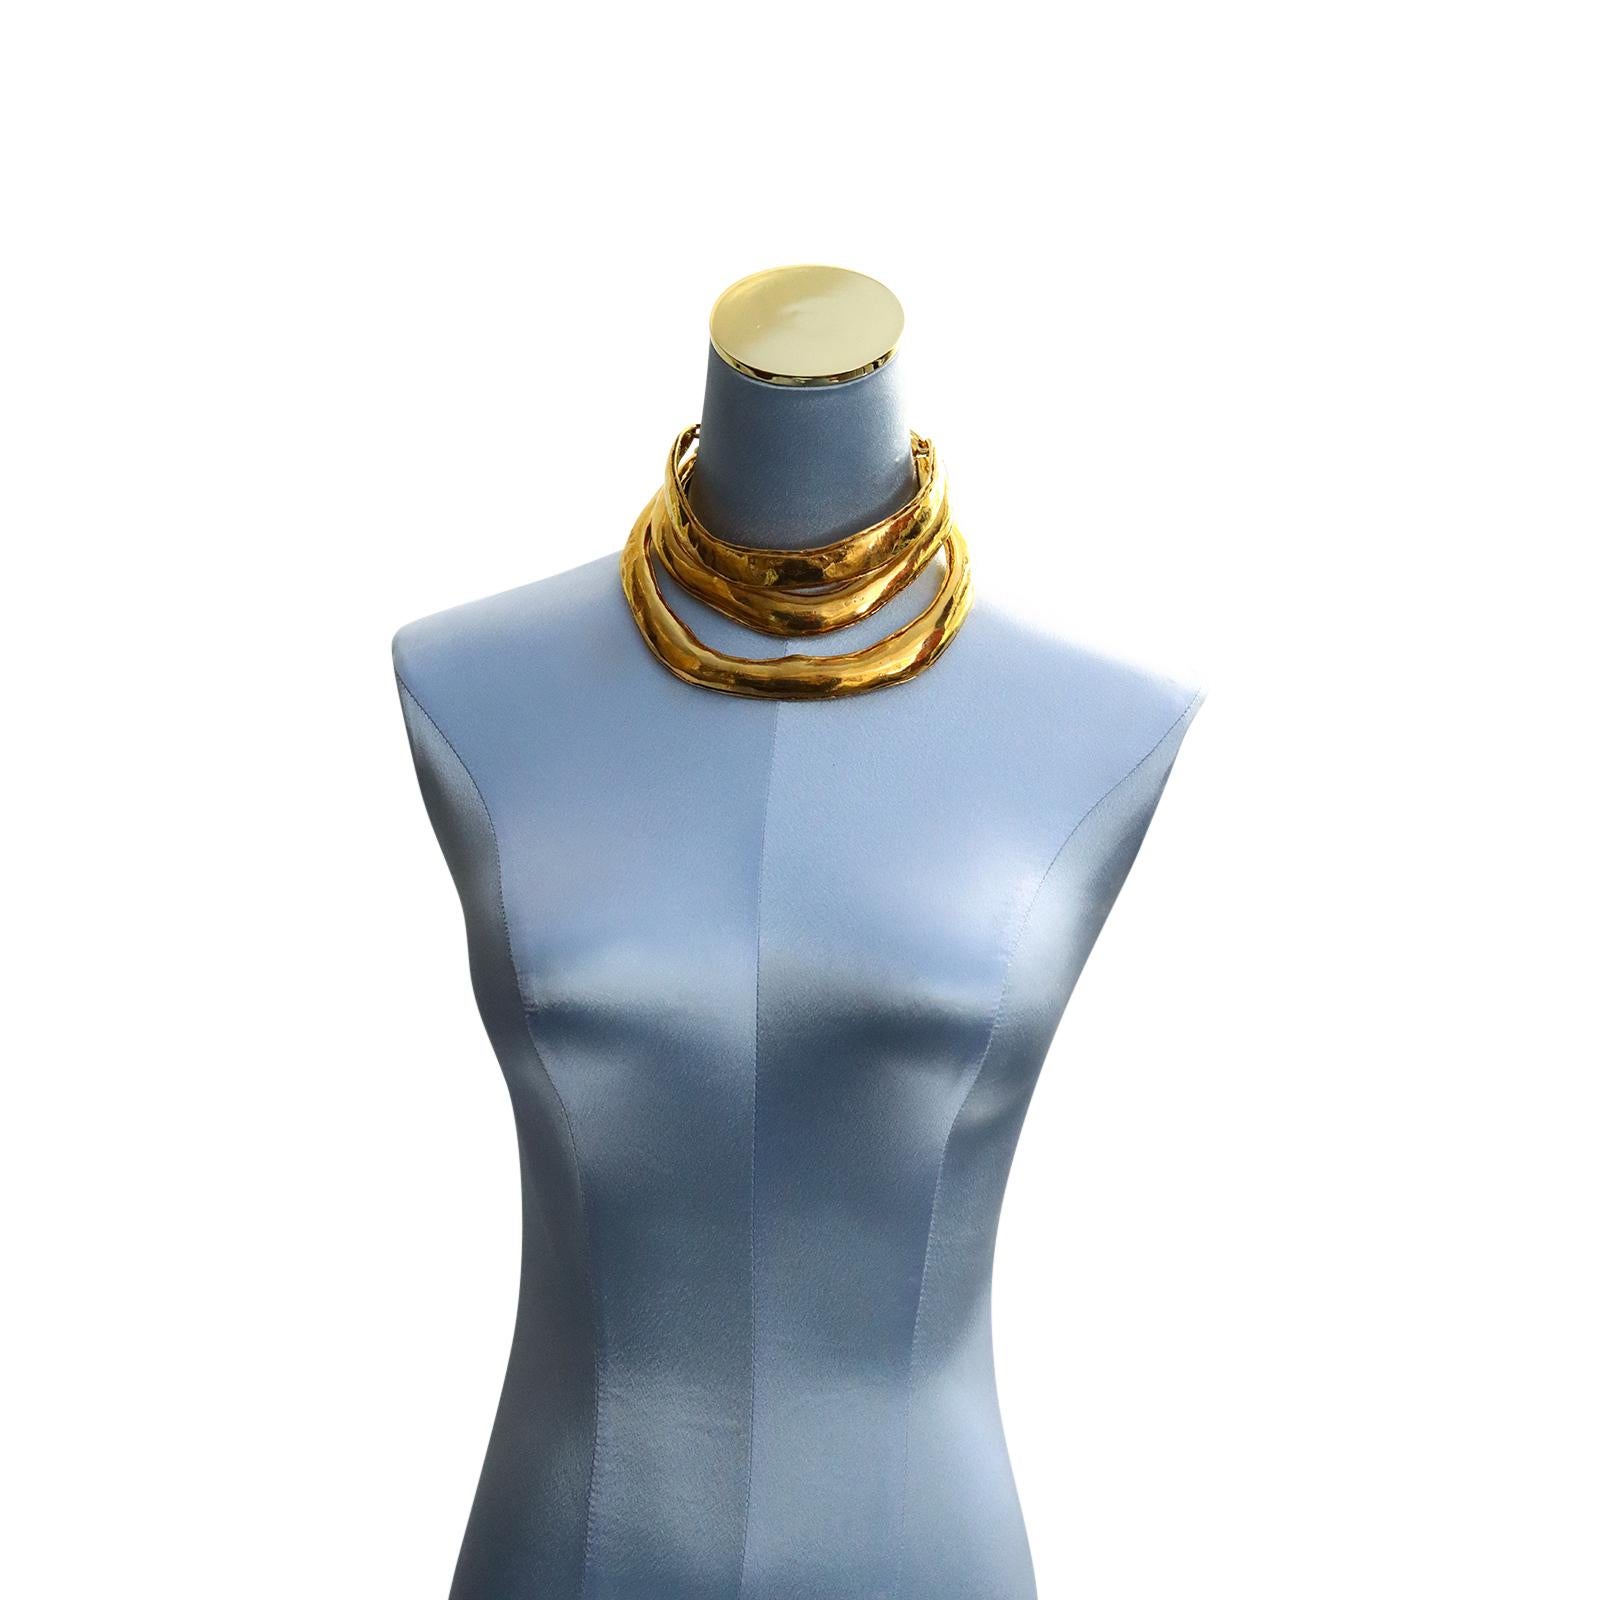 Vintage CHRISTIAN LACROIX Triple Layer Gold Tone Choker Masai Necklace. Triple Ring  Rigid Necklace Choker. This is ICONIC Lacroix.

This will elevate your look and be in style until the end of time.

Measurements:
Inner Circumference: 12.40 inches